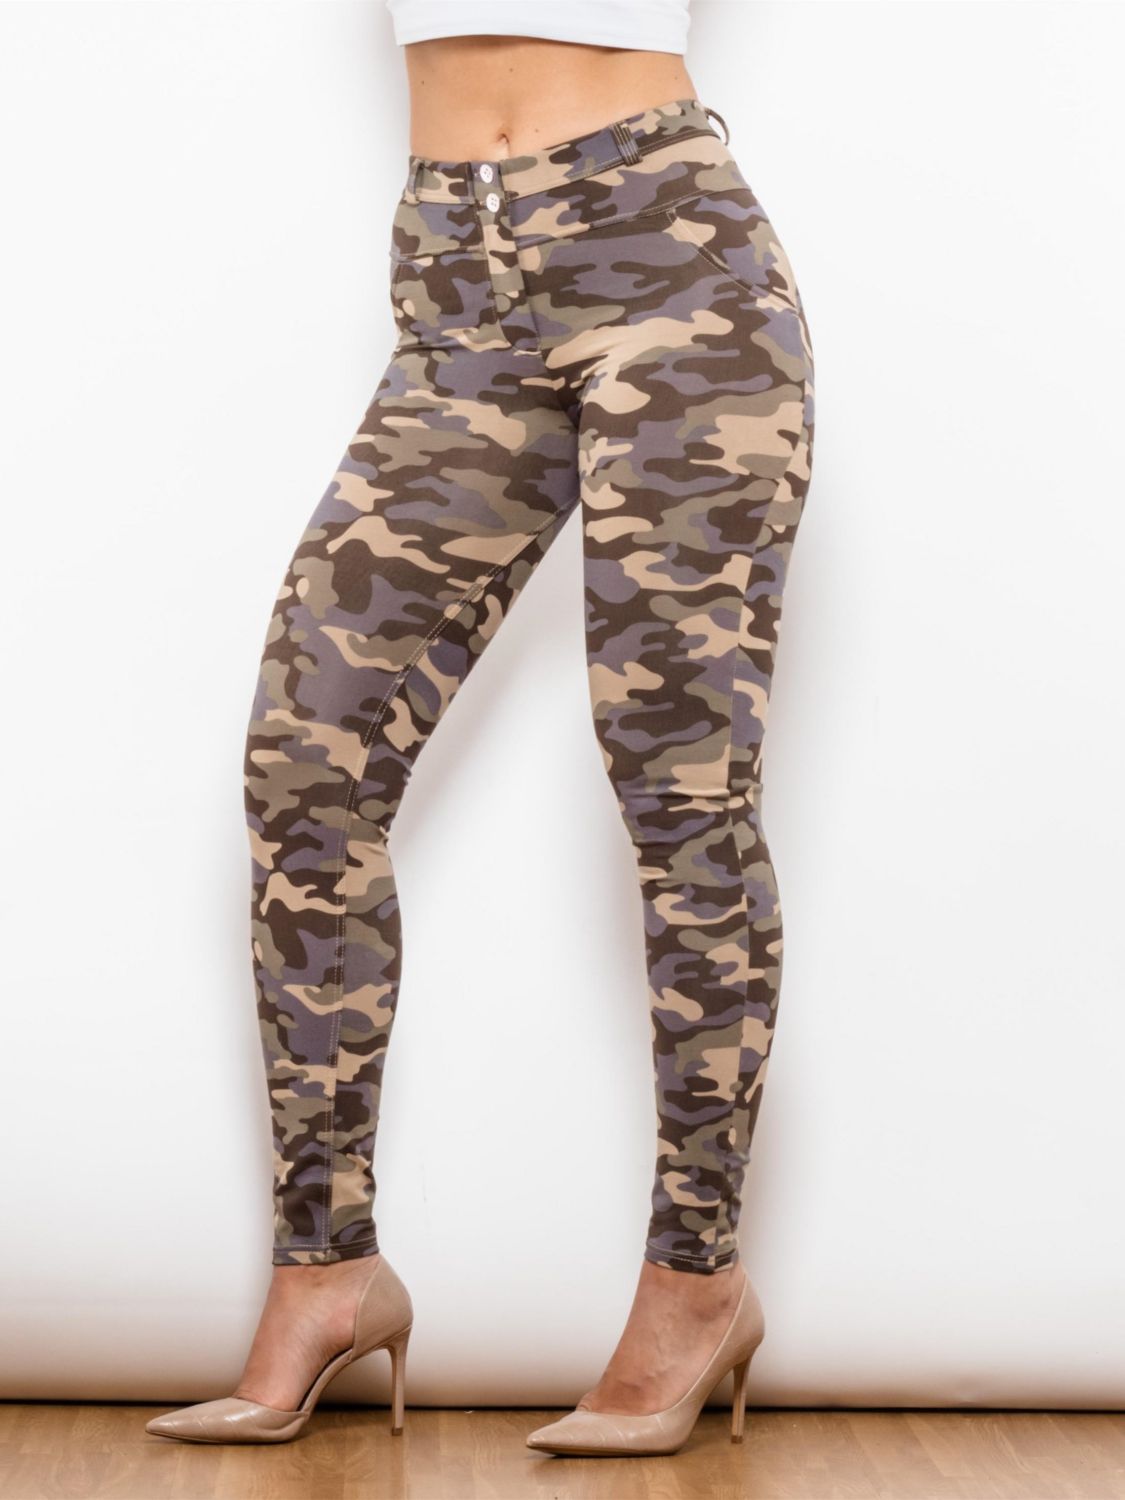 Full Size Camouflage Buttoned Leggings - Kawaii Stop - A&Z, Camouflage Leggings, Chic Style, Comfortable Fit, Confidence Booster, Easy Care, Fashion., Fashionista's Choice, Fitness and Fashion, Fitness Leggings, Gym-to-Street Fashion, Imported Leggings, Leggings, Moderate Stretch, Premium Material, Sculpted Look, Sheer Confidence, Ship From Overseas, Shipping Delay 09/29/2023 - 10/01/2023, Sleek Silhouette, Slim Fit, Trendy Leggings, Versatile, Women's Clothing, Women's Fashion